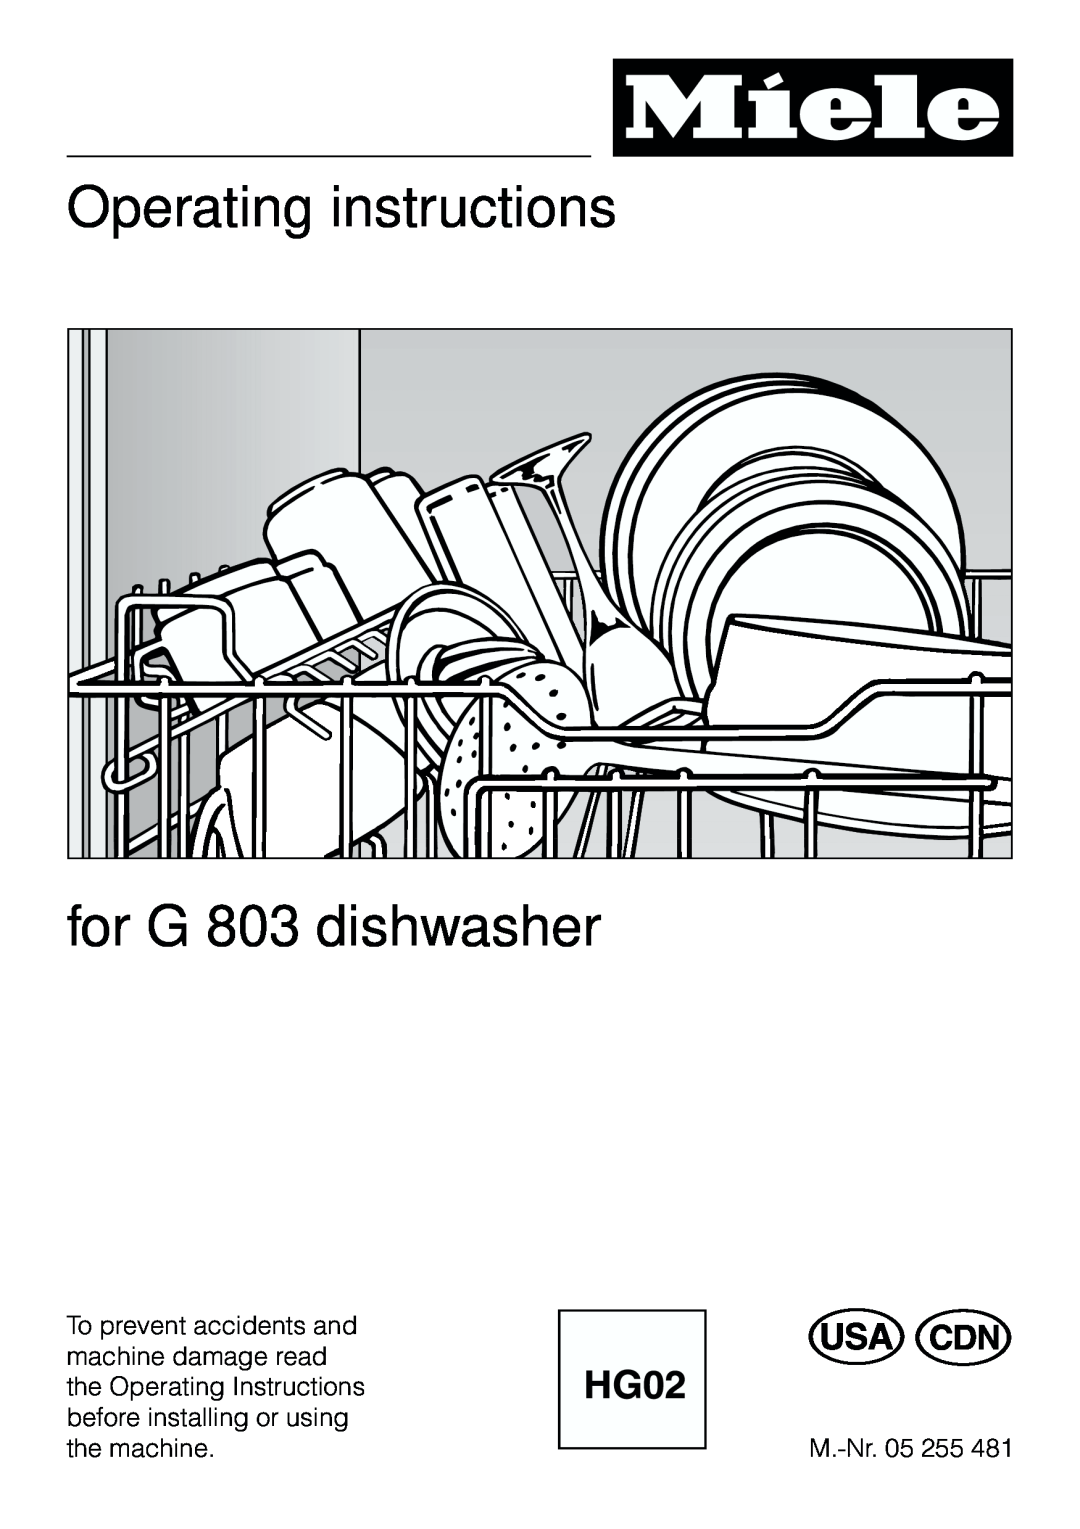 Miele manual Operating instructions for G 803 dishwasher 